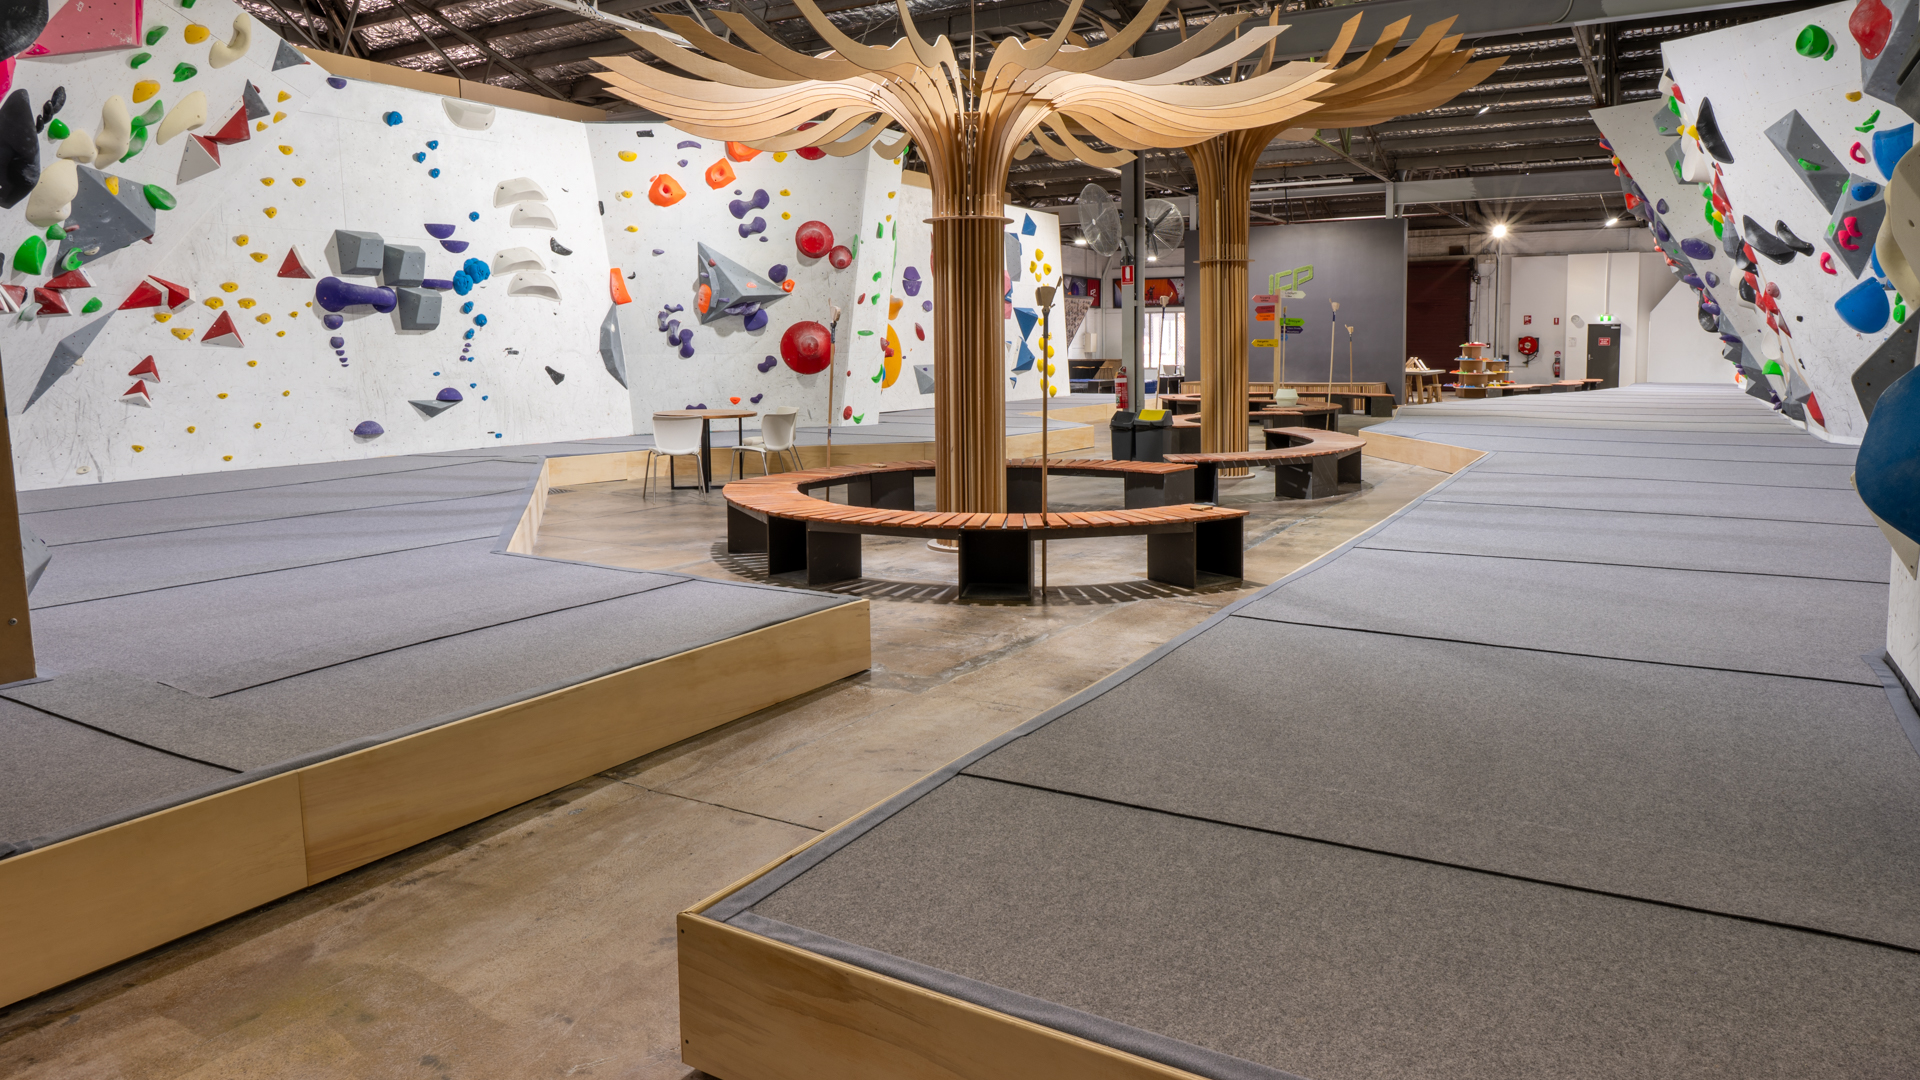 ICP boulder hall & showroom with climbing walls and lots of colourful holds